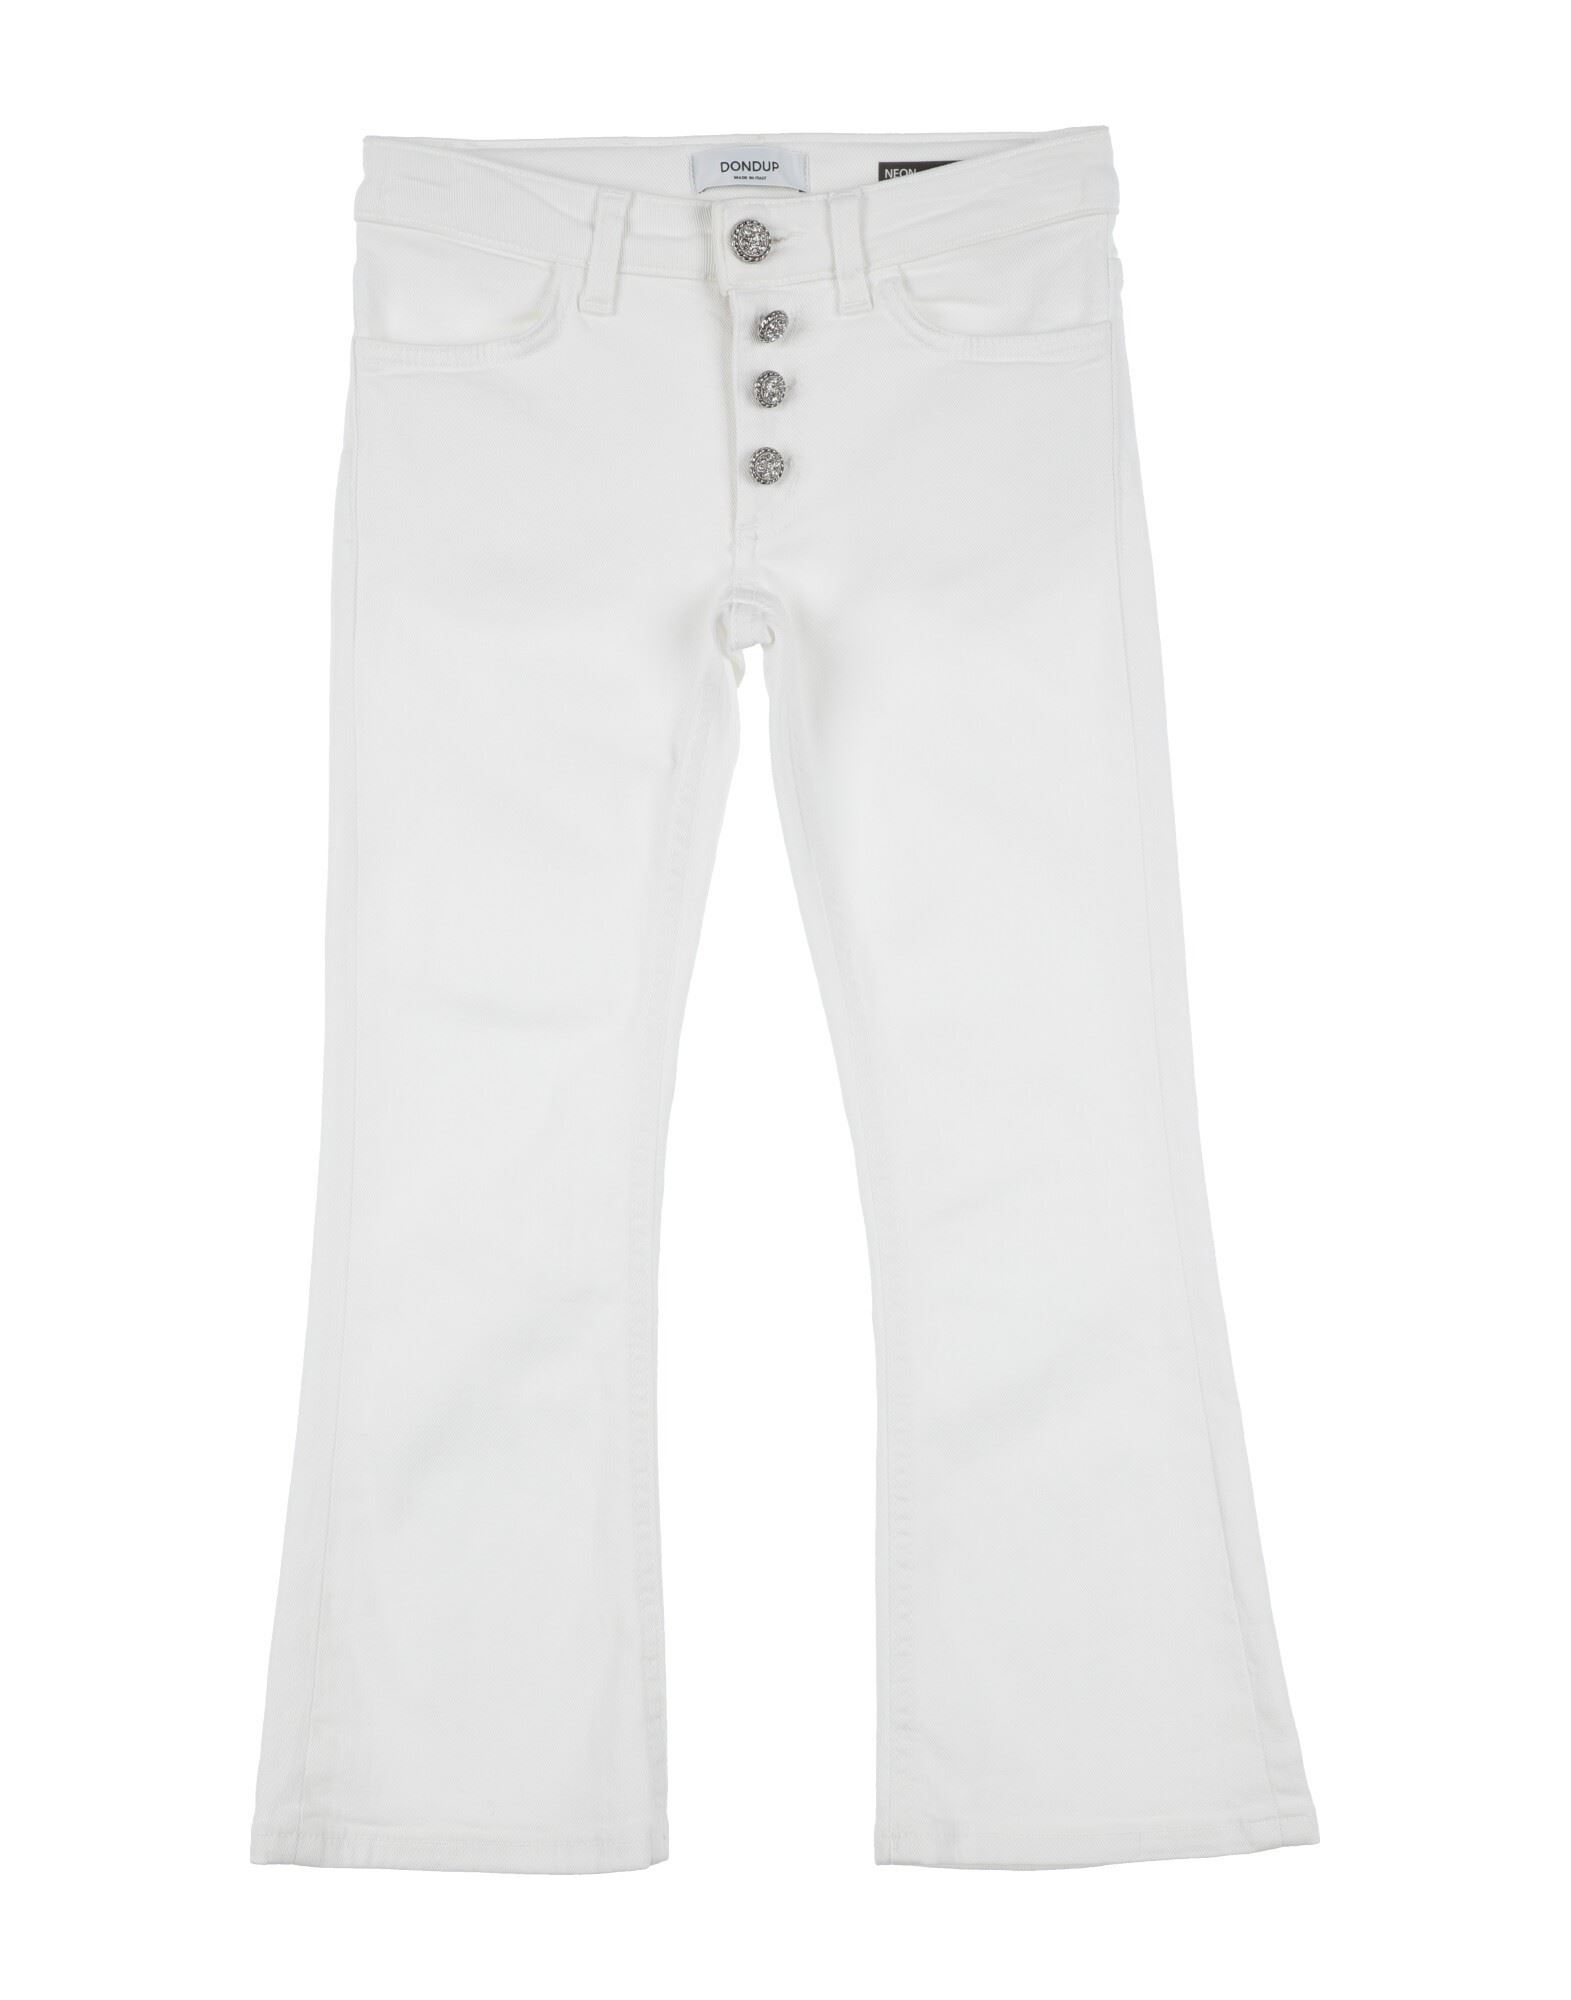 Dondup Kids' Jeans In White